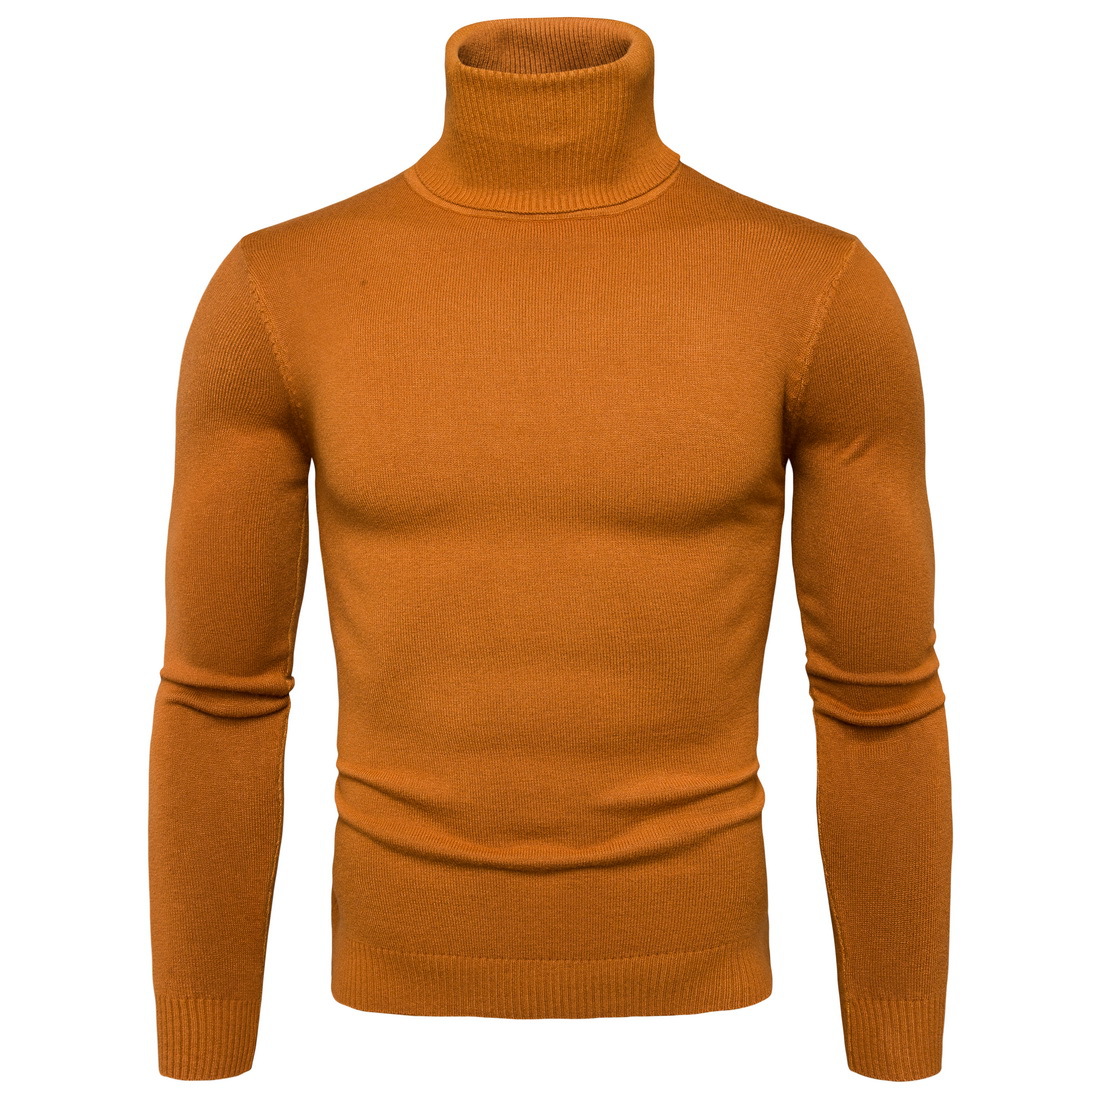 Men Knitted Sweater Autumn Winter Turtleneck Long Sleeve Casual Slim Pullover Tops yellow